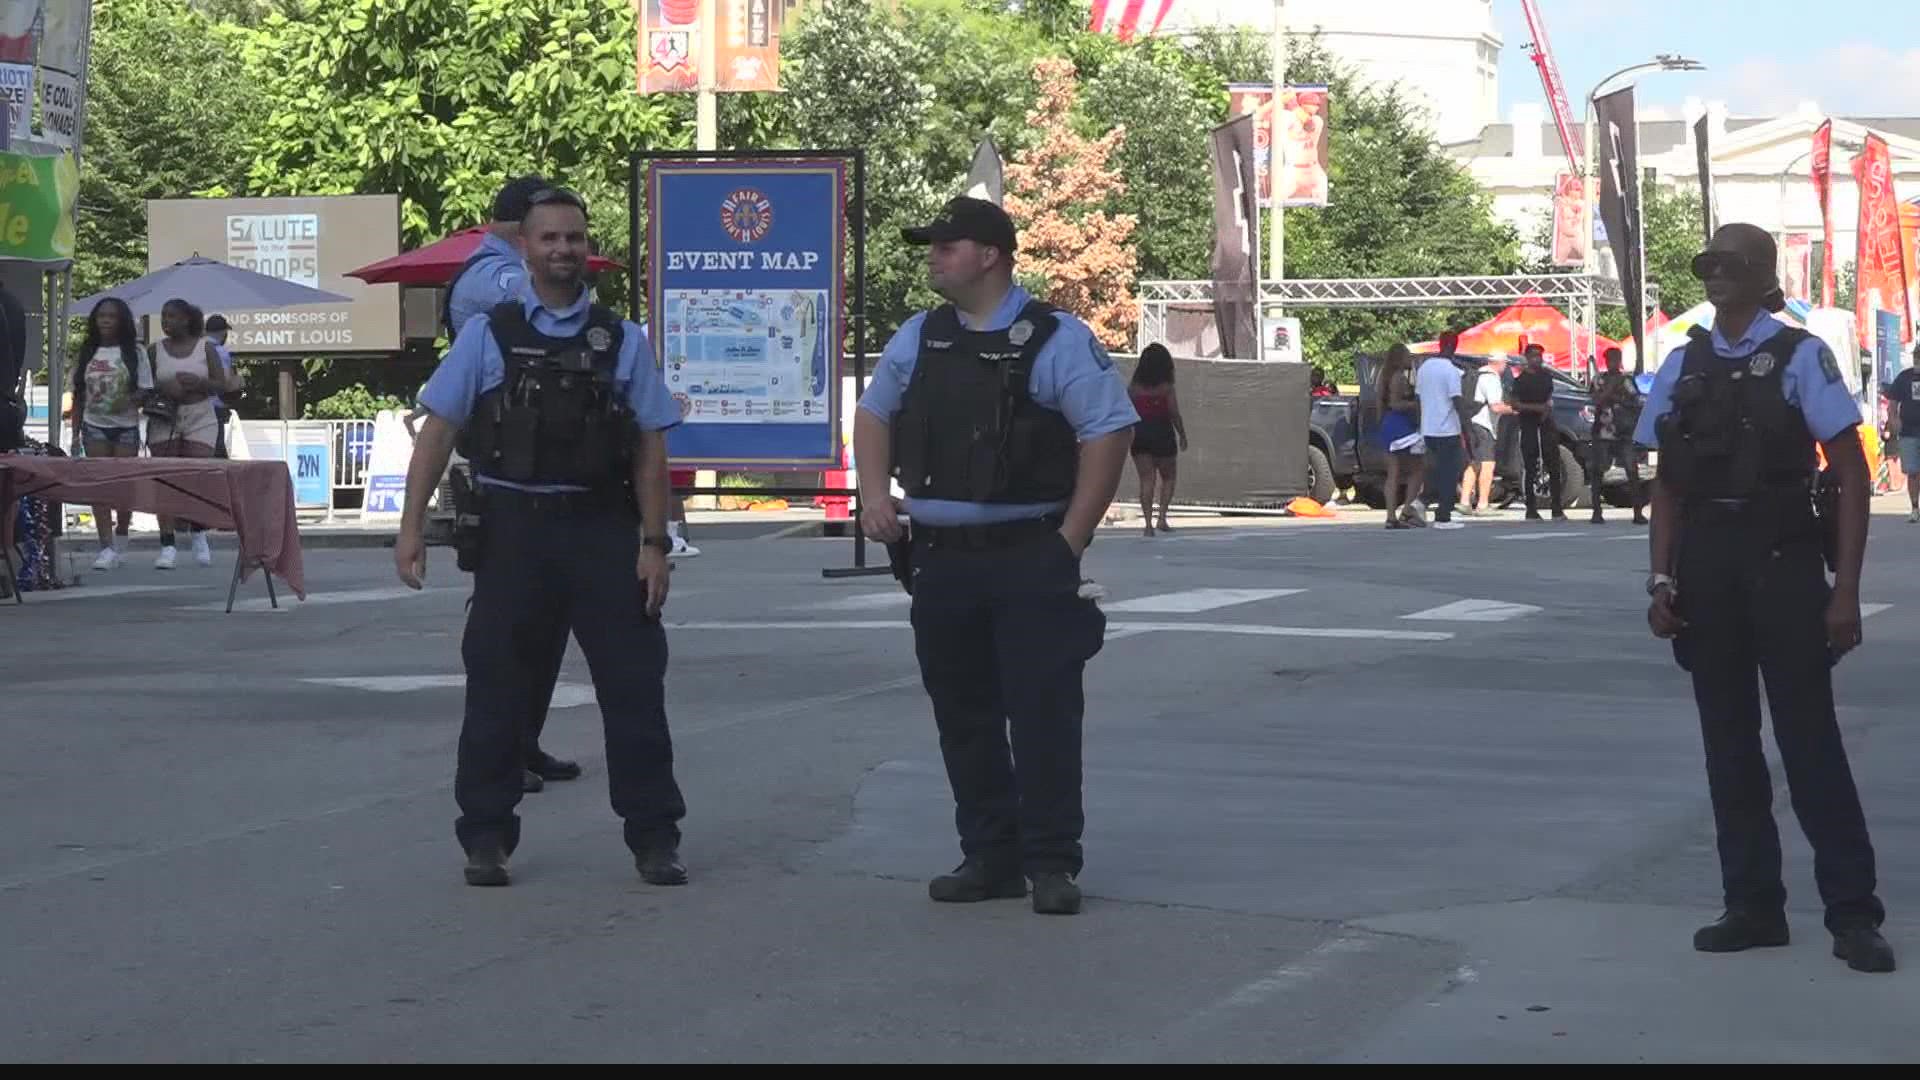 The shooting in Highland Park, Illinois has put law enforcement and parade goers on high alert. In St. Louis, police were out in full force on July 4